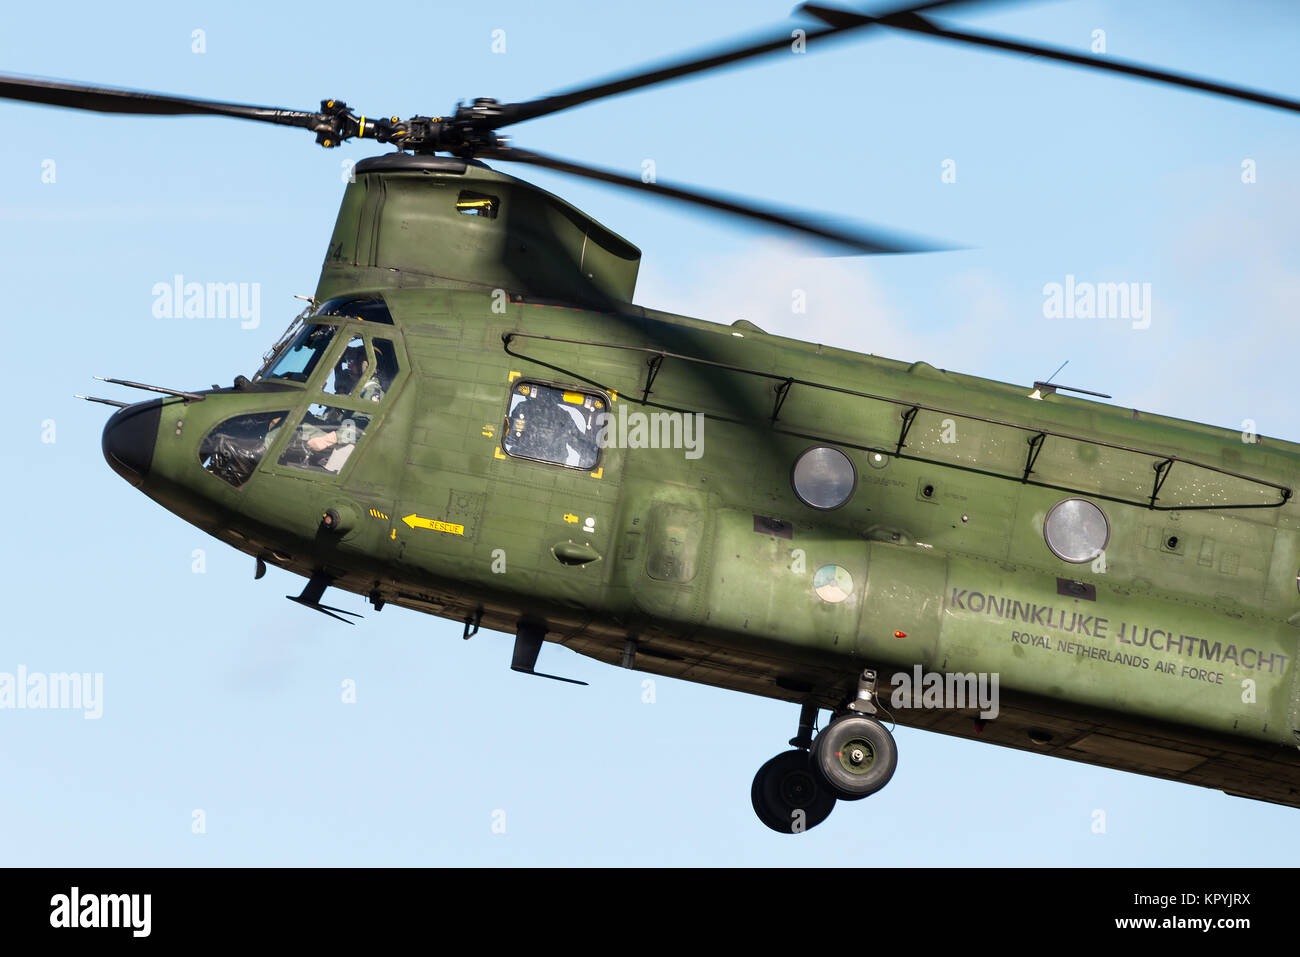 A Boeing CH-47 Chinook military transport helicopter of the Royal Netherlands Air Force. Stock Photo